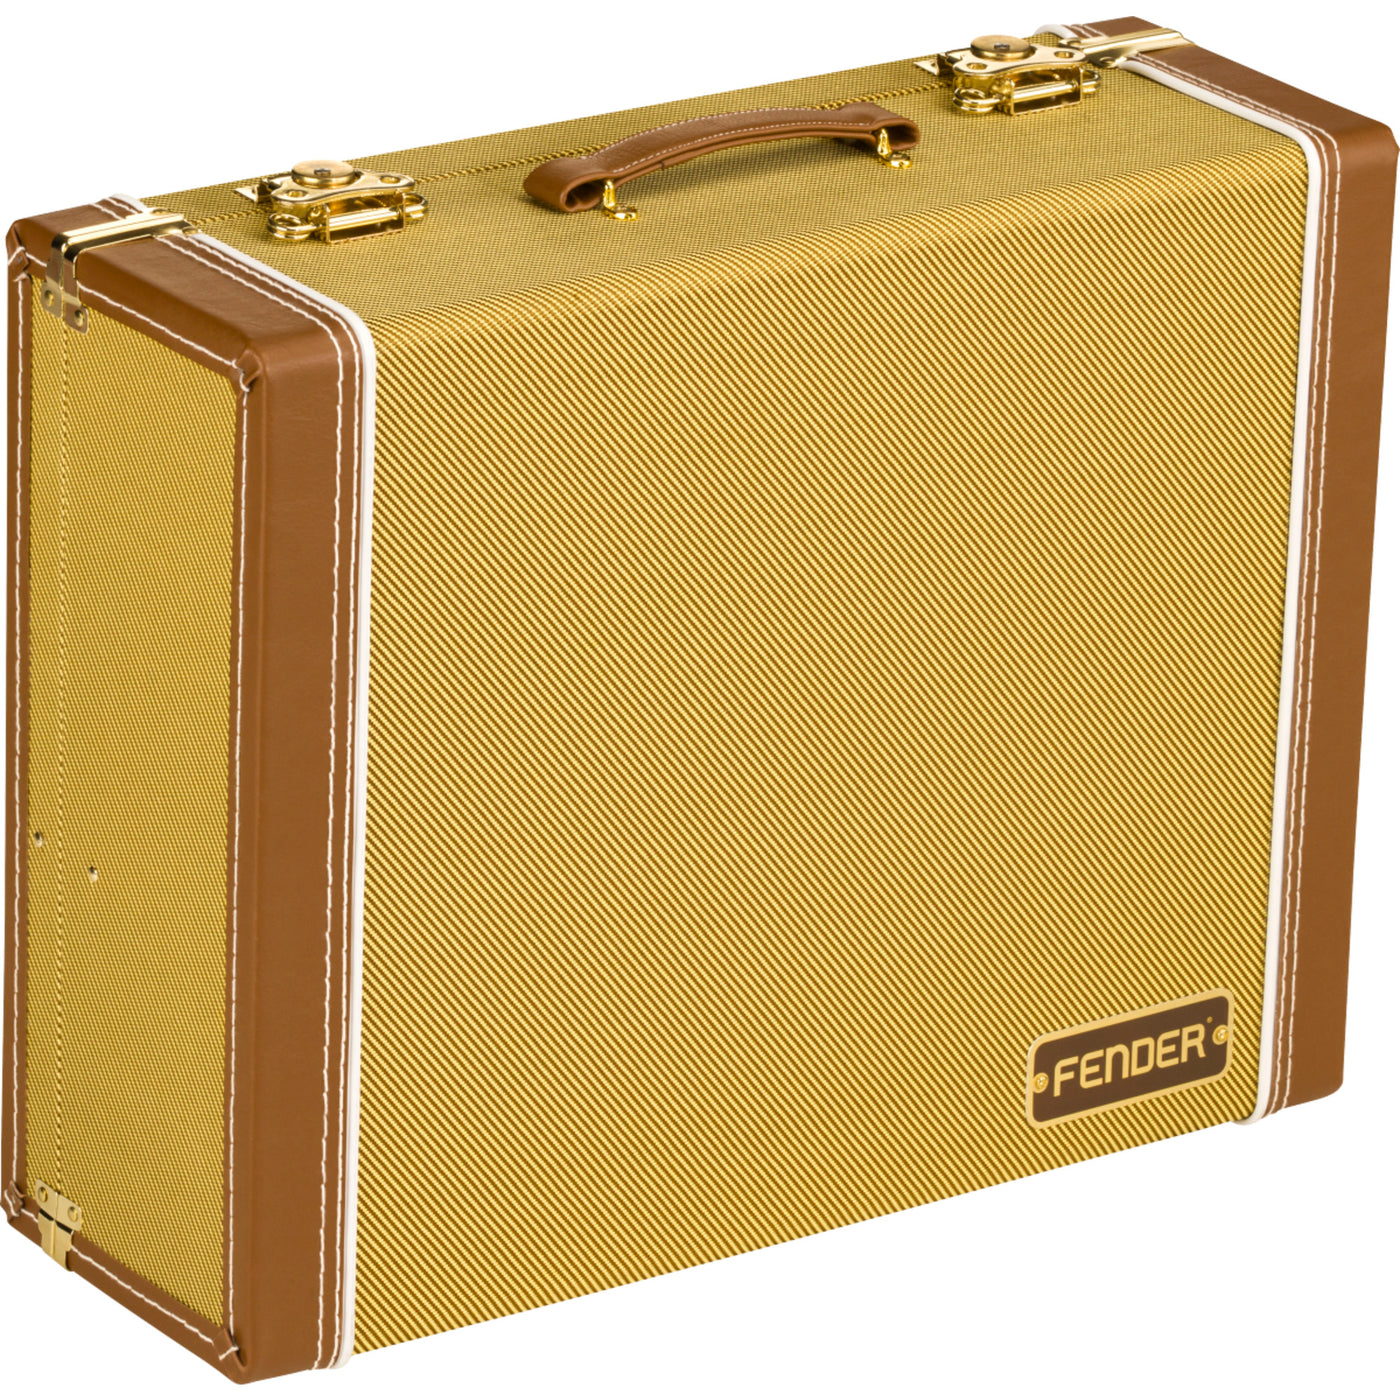 Fender Classic Series Tweed Pedal Board Case, Small (0996106501)